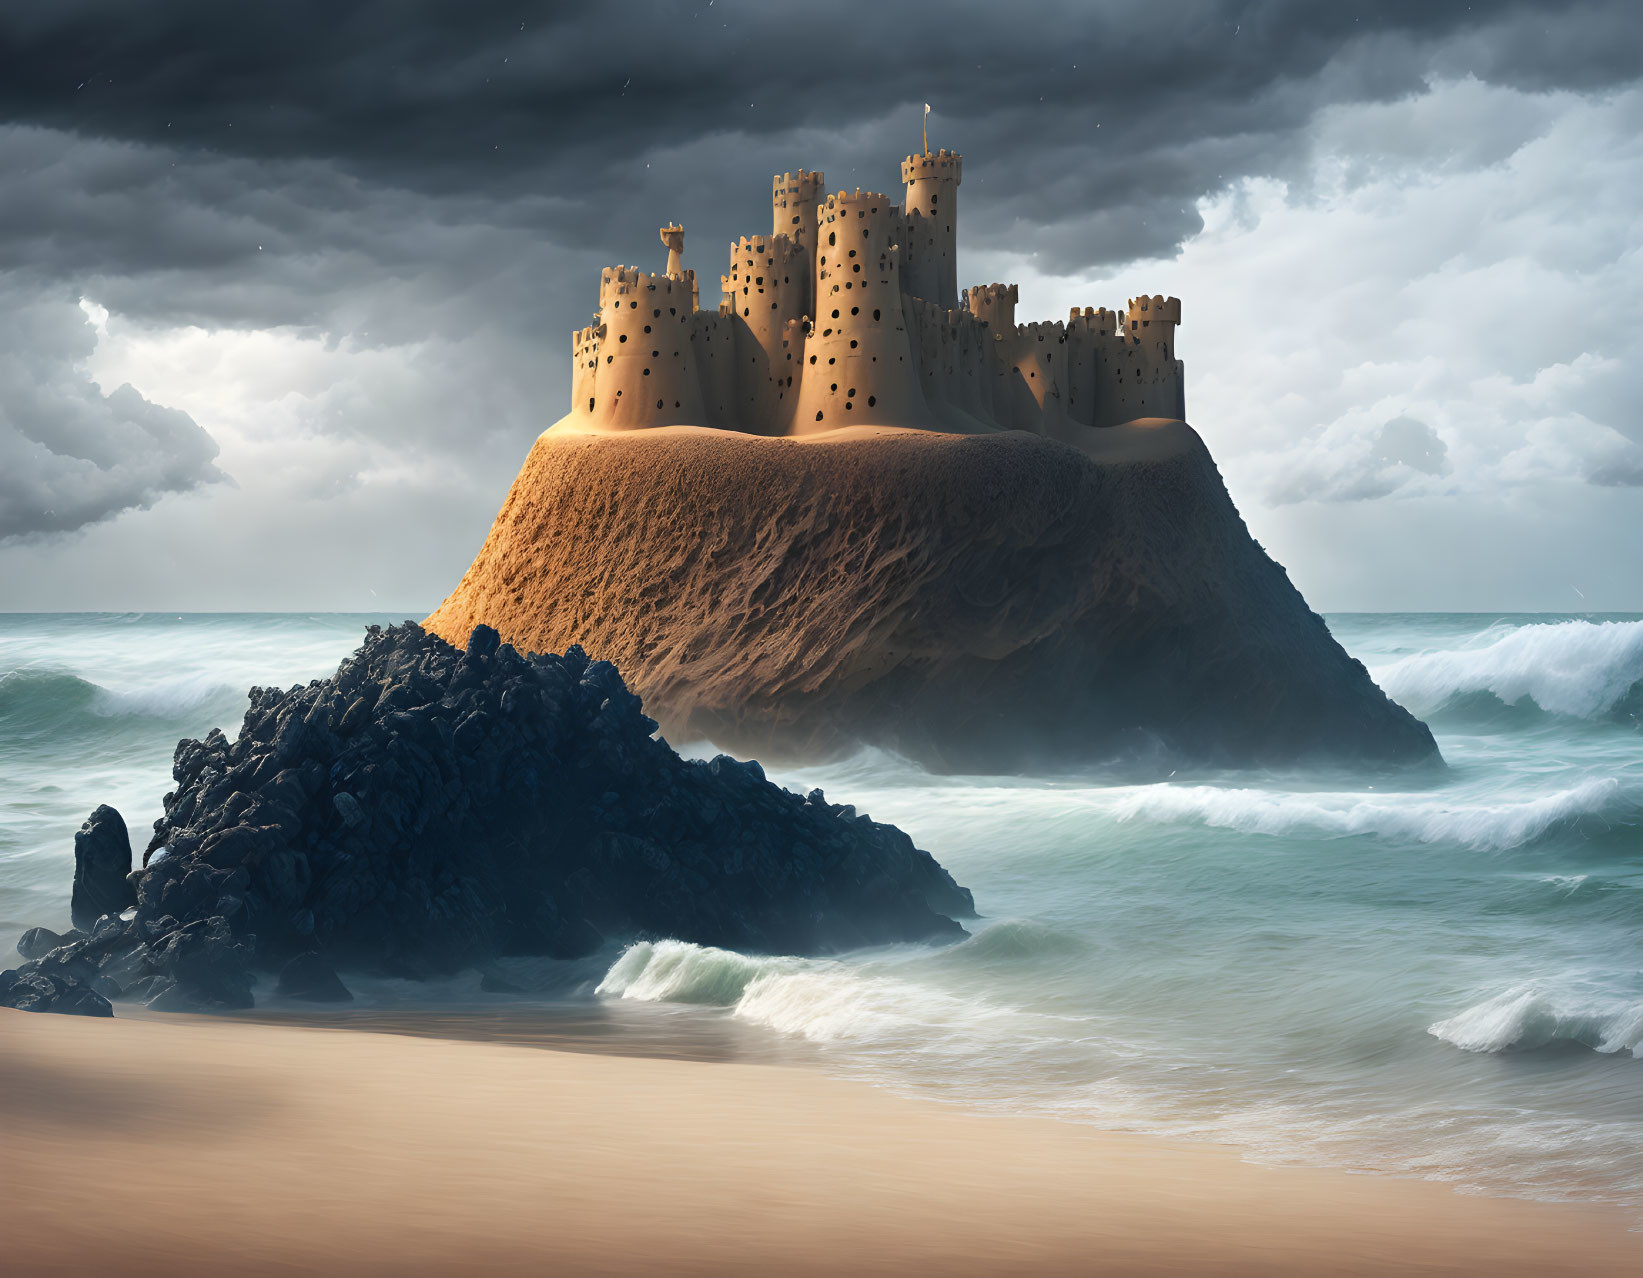 Majestic sand castle on hill with tumultuous sea and dramatic sky